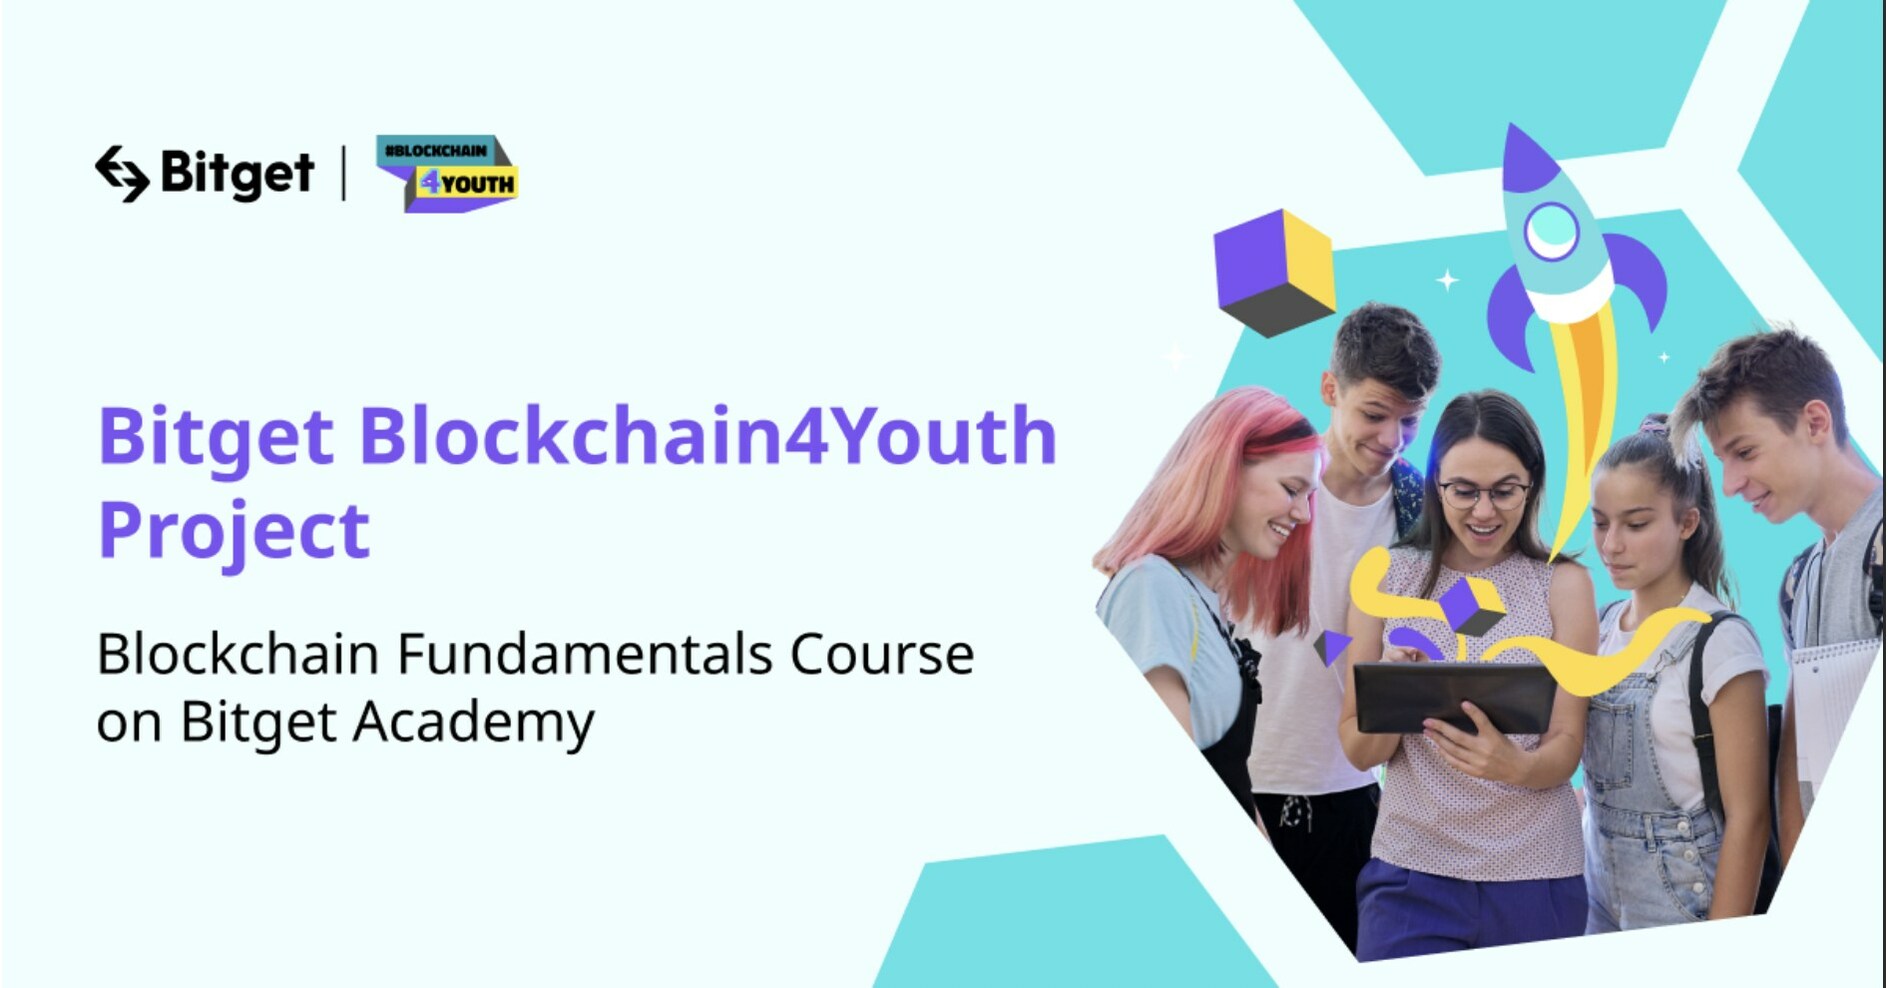 Bitget’s Blockchain4Youth project debuts educational blockchain courses